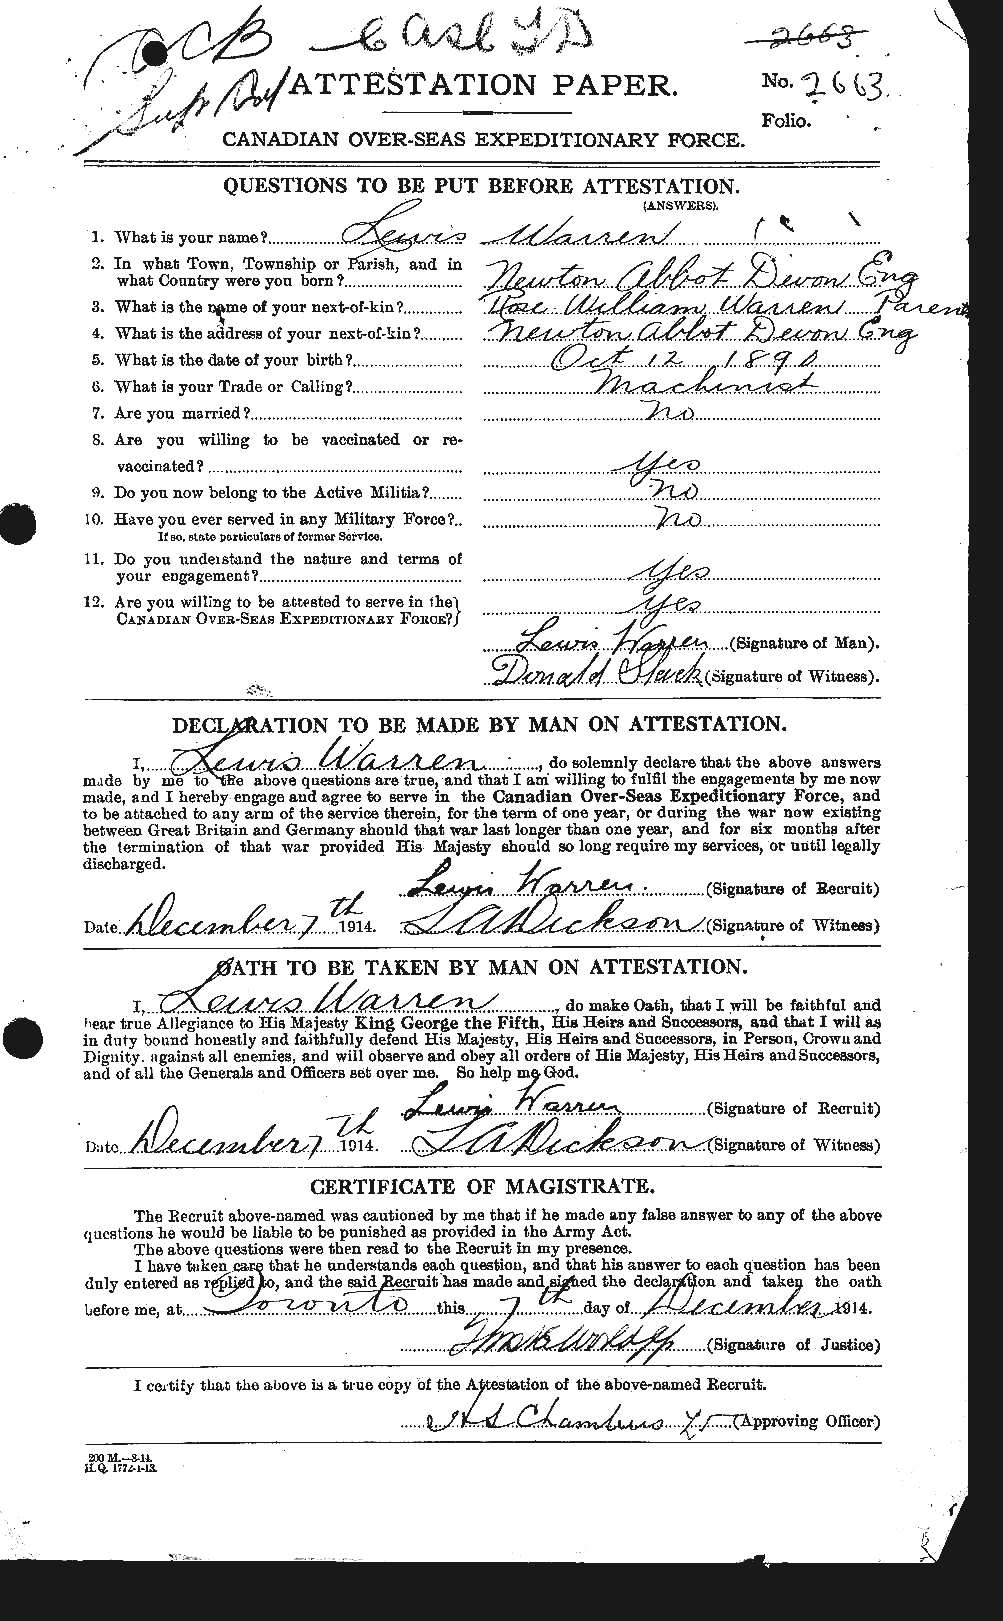 Personnel Records of the First World War - CEF 658588a